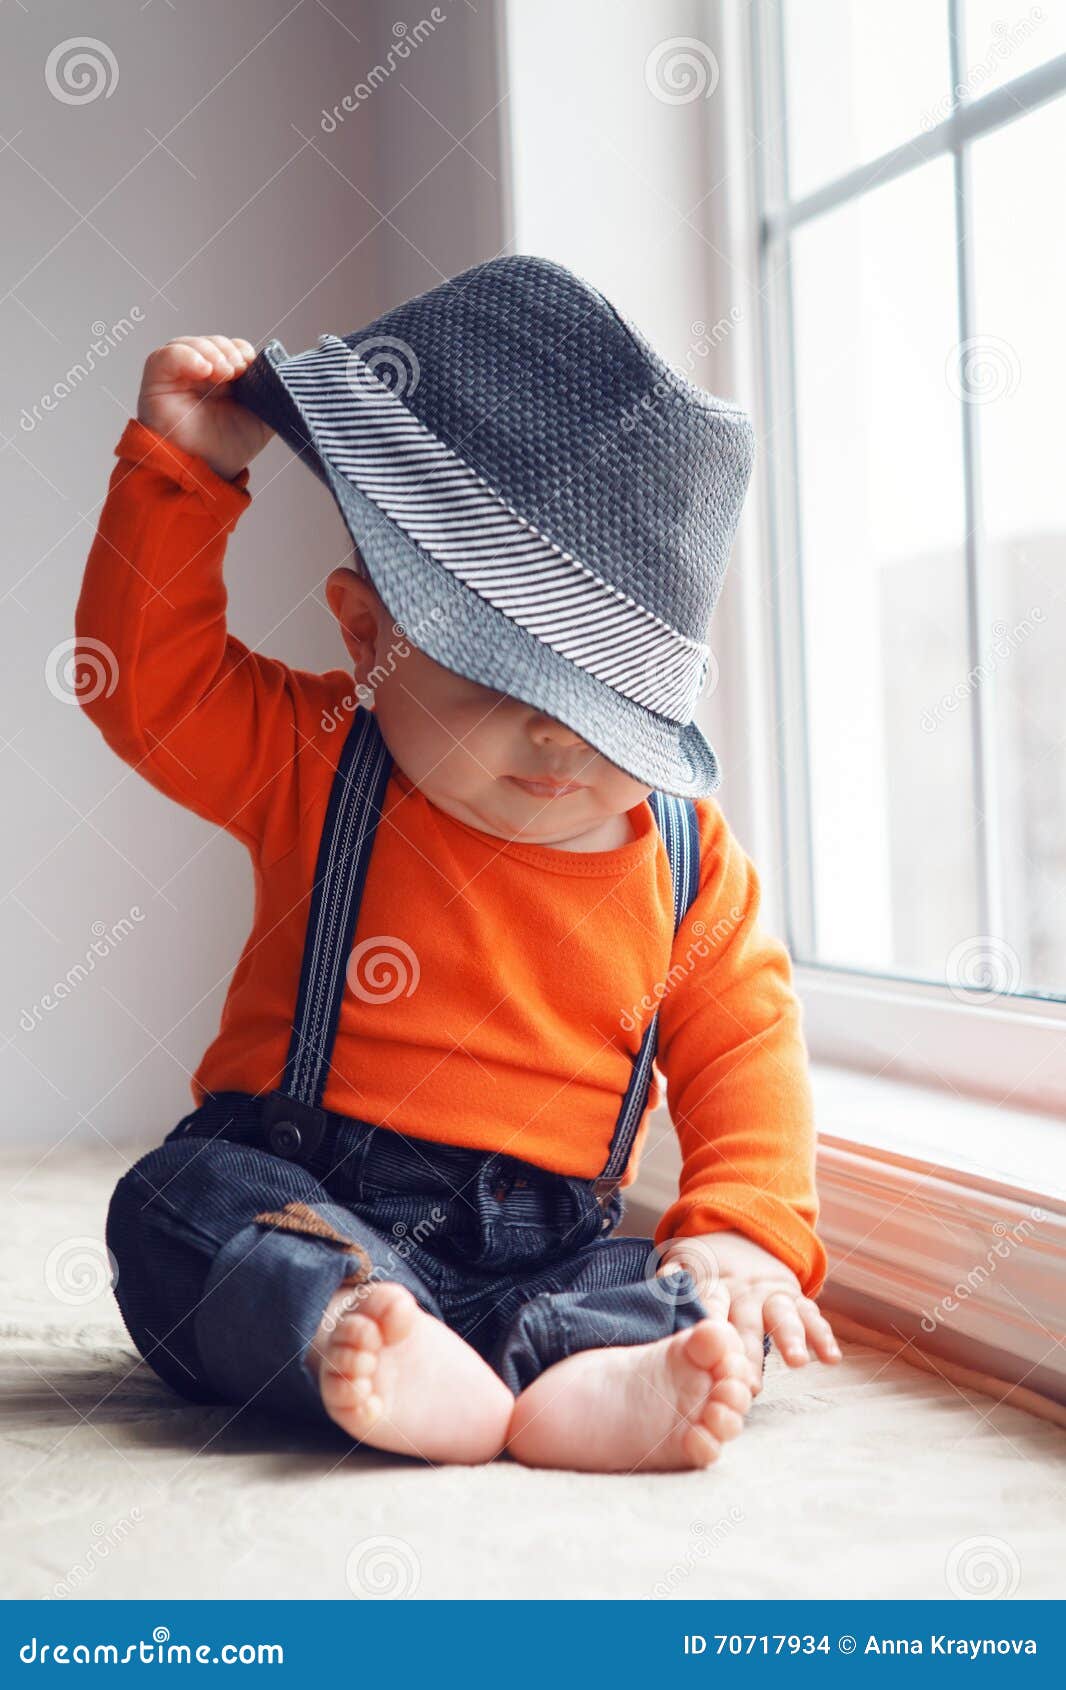 Cute Infant Baby in Hat Near Window Stock Photo - Image of ...